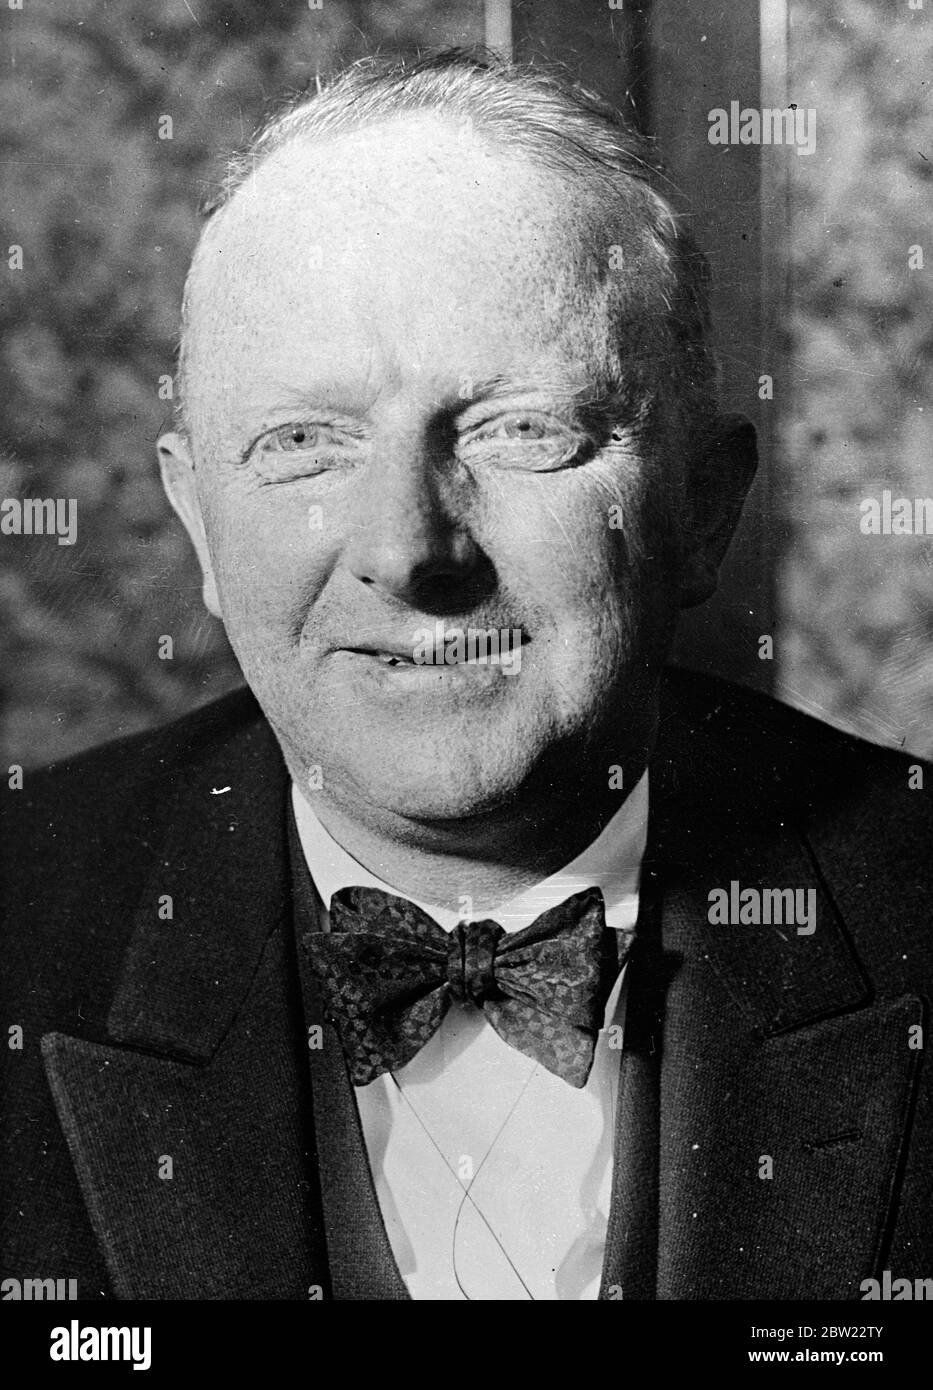 Mr Nelson T. Johnson, US Ambassador to Nanking. After announcing that United States warships in the Yangtze river would not move so long as there was one American to protect, the Ambassador boarded the US gunboat Luzon and moved 10 miles up the river. The Chinese expressed disappointment at America's obedience to Japan. 21 September 1937 [On the eve of the expiration of Japan's trade treaty with the US, Japanese intelligence officers alleged that there is a Chinese plot to kill Mr Johnson, US ambassador to China 26 January 1940] Stock Photo